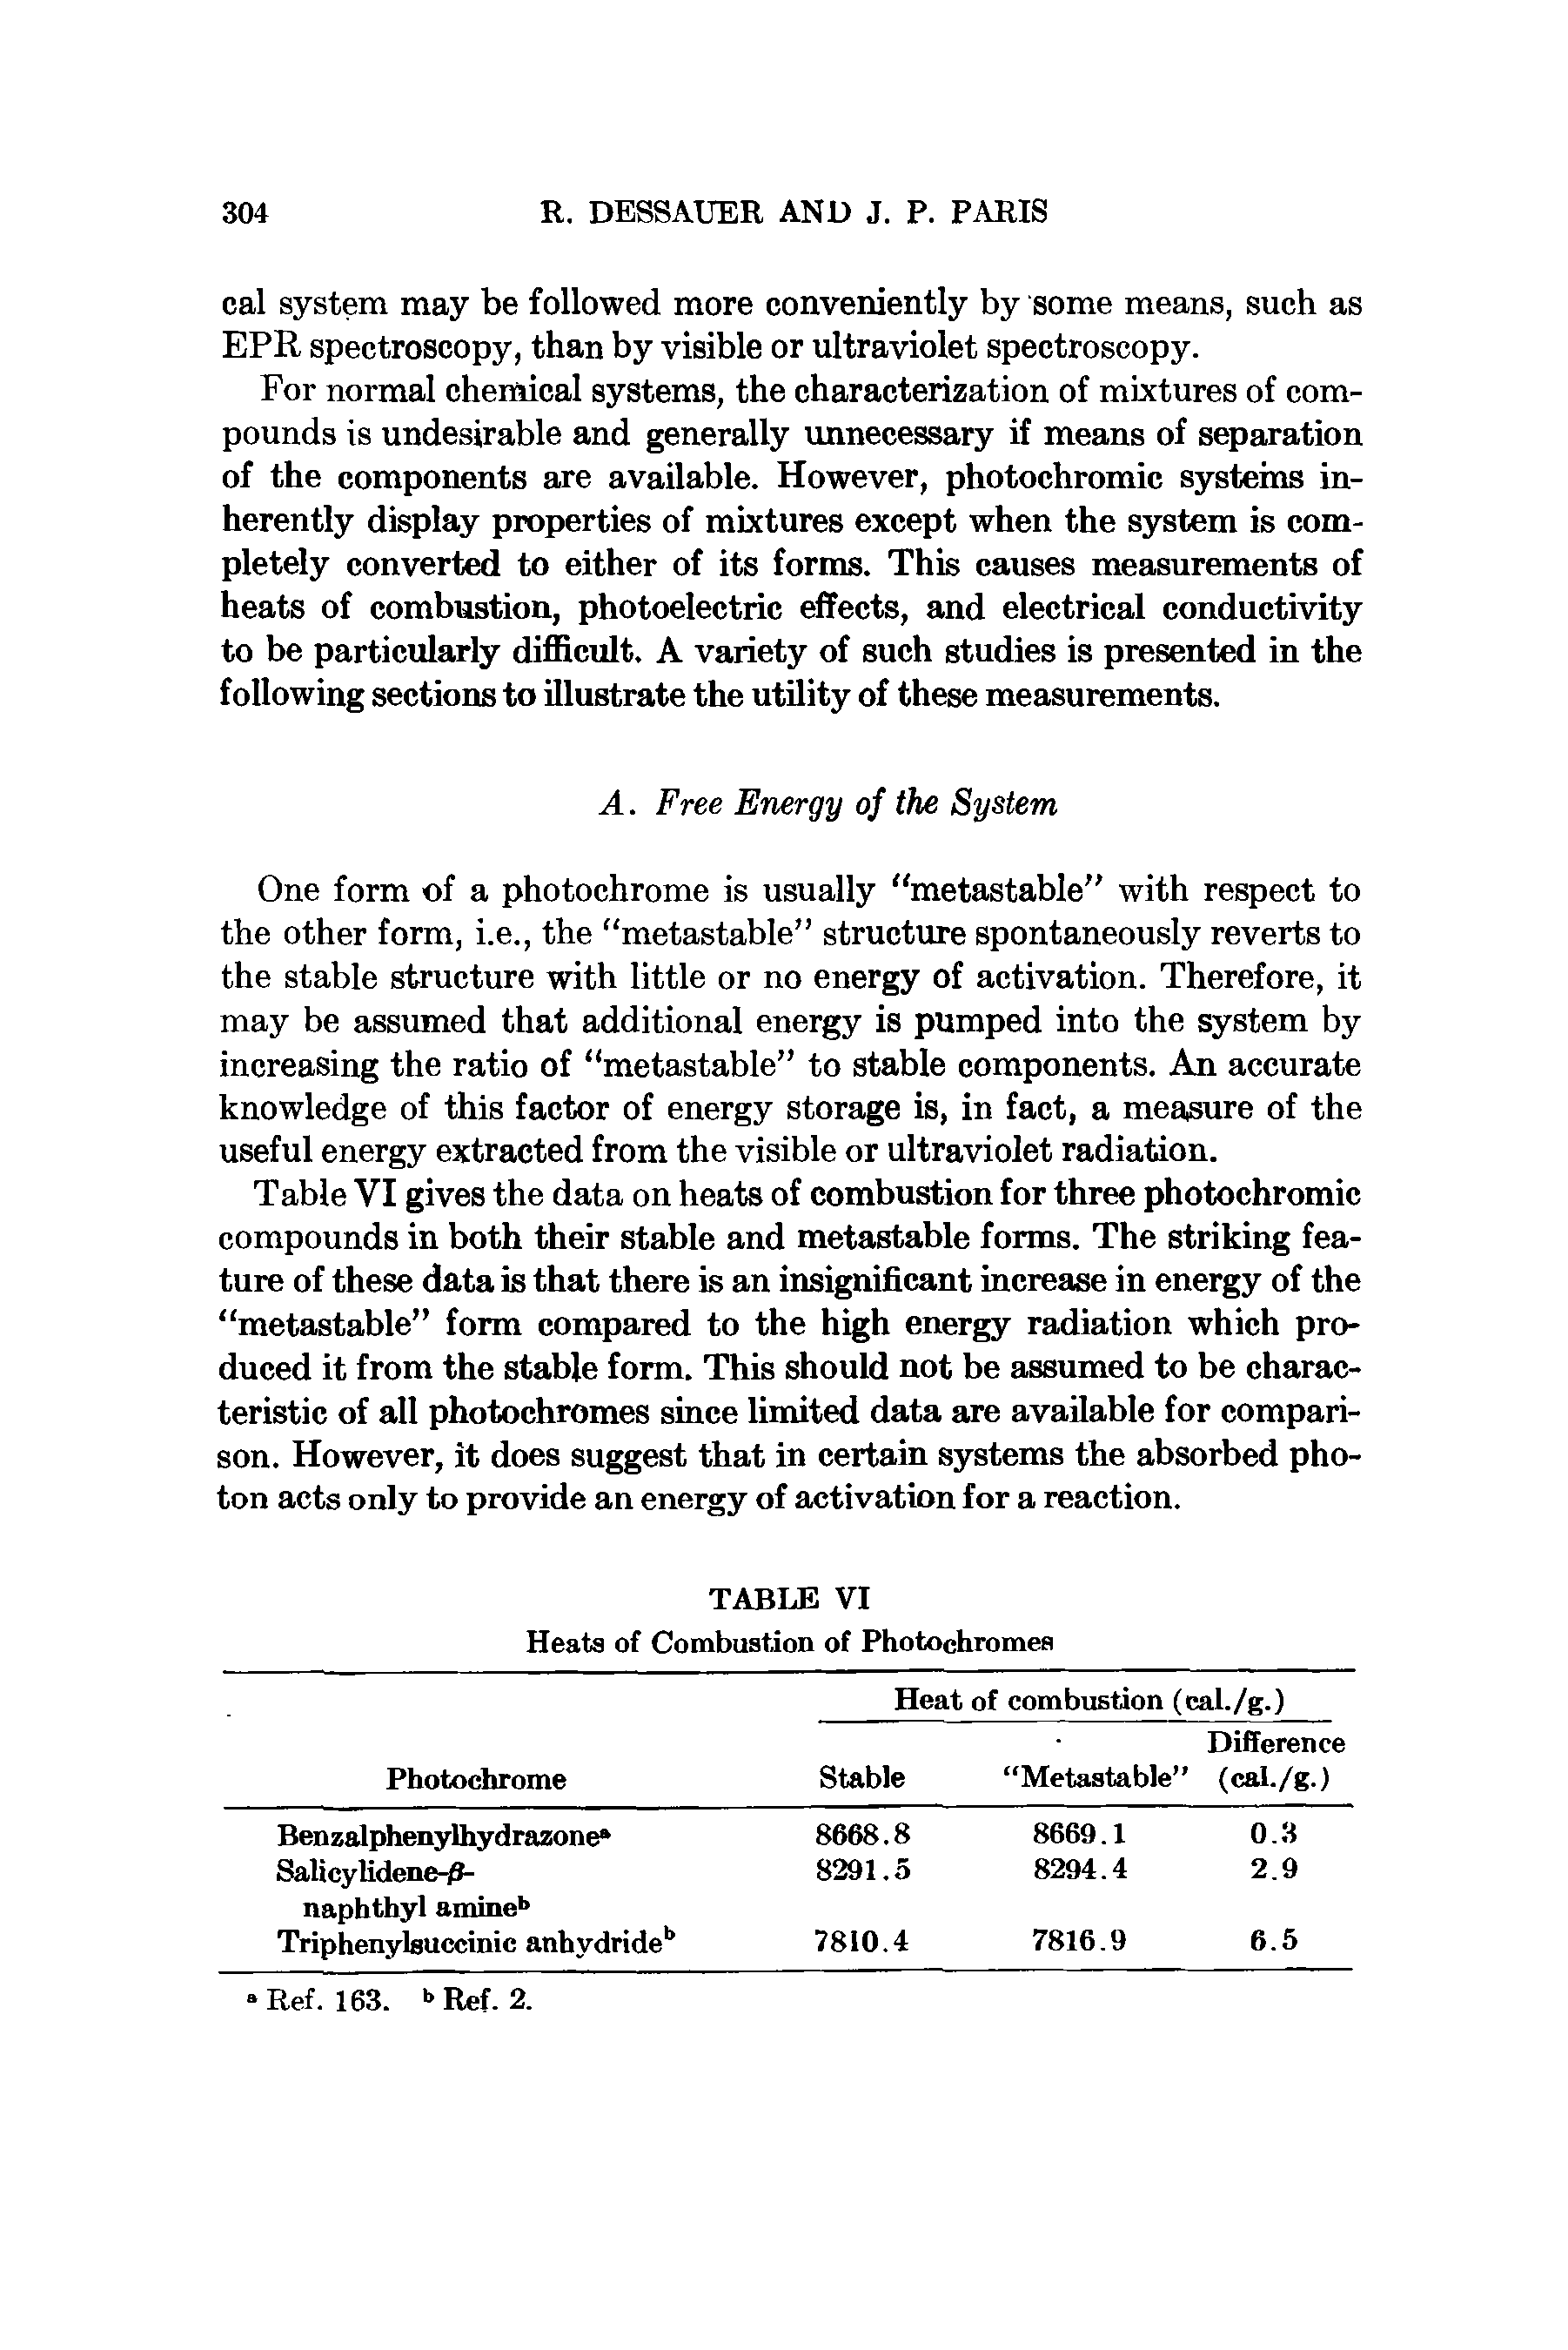 Table VI gives the data on heats of combustion for three photochromic compounds in both their stable and metastable forms. The striking feature of these data is that there is an insignificant increase in energy of the metastable form compared to the high energy radiation which produced it from the stable form. This should not be assumed to be characteristic of all photochromes since limited data are available for comparison. However, it does suggest that in certain systems the absorbed photon acts only to provide an energy of activation for a reaction.